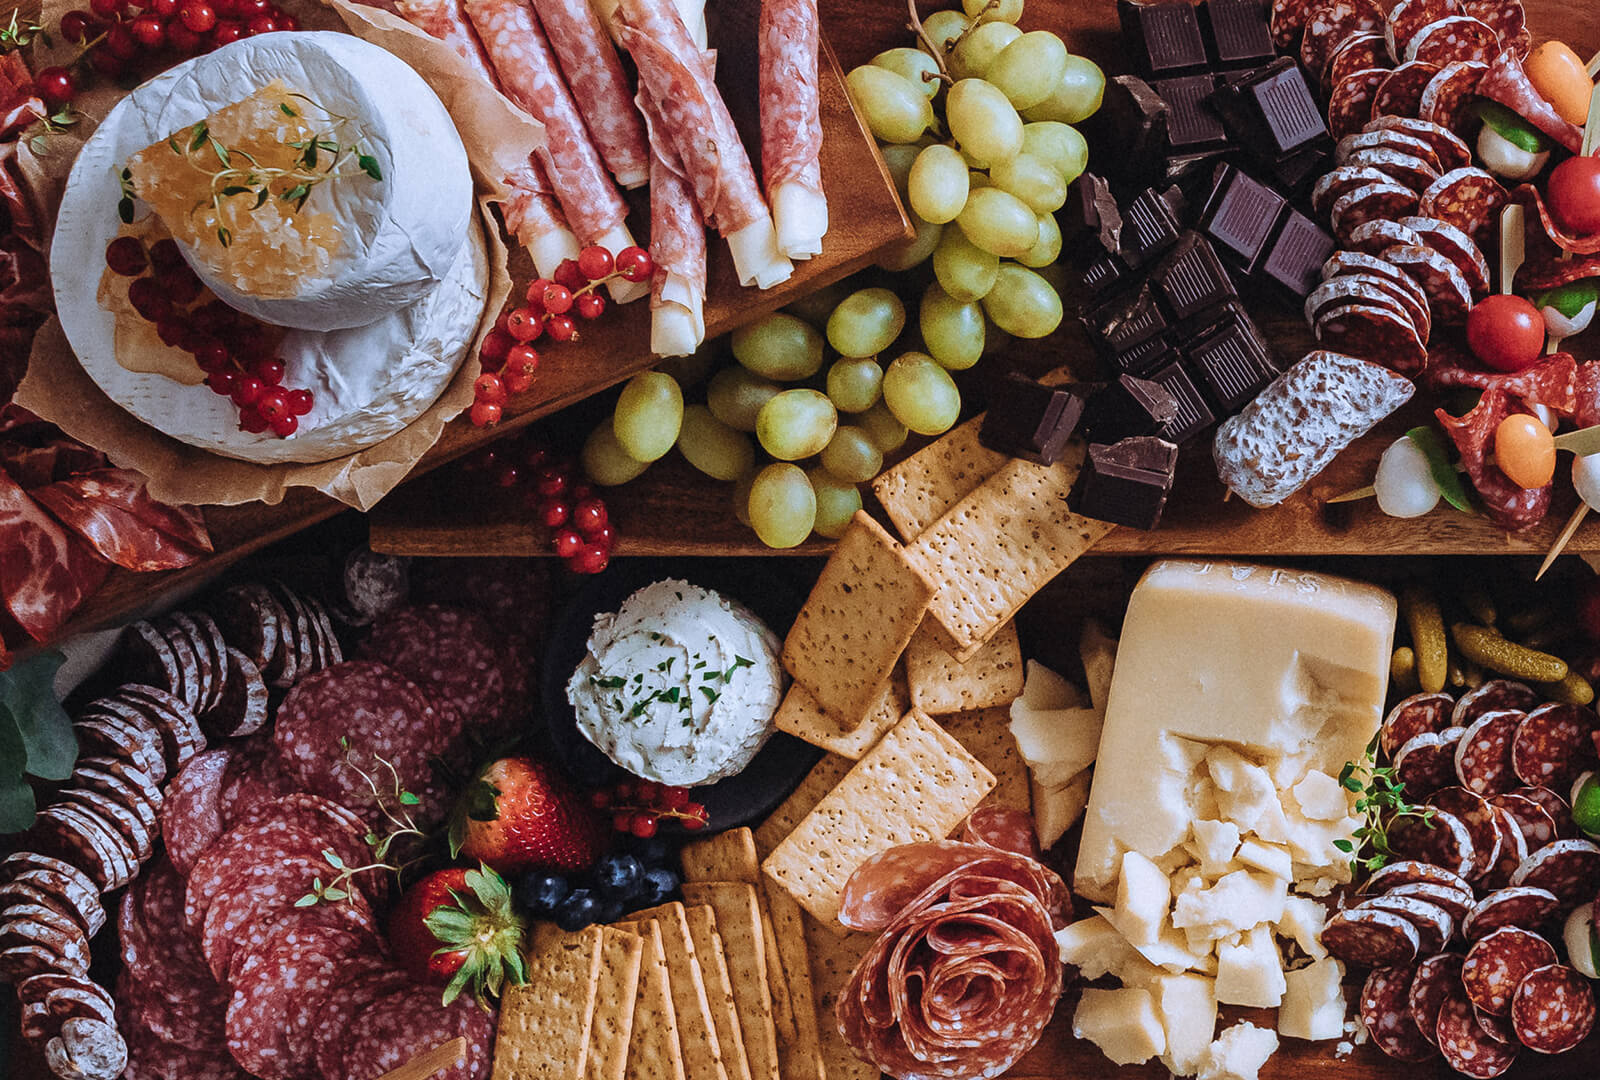 https://www.hormelfoods.com/wp-content/uploads/Inspired_20210726_Showstopping-Charcuterie.jpg